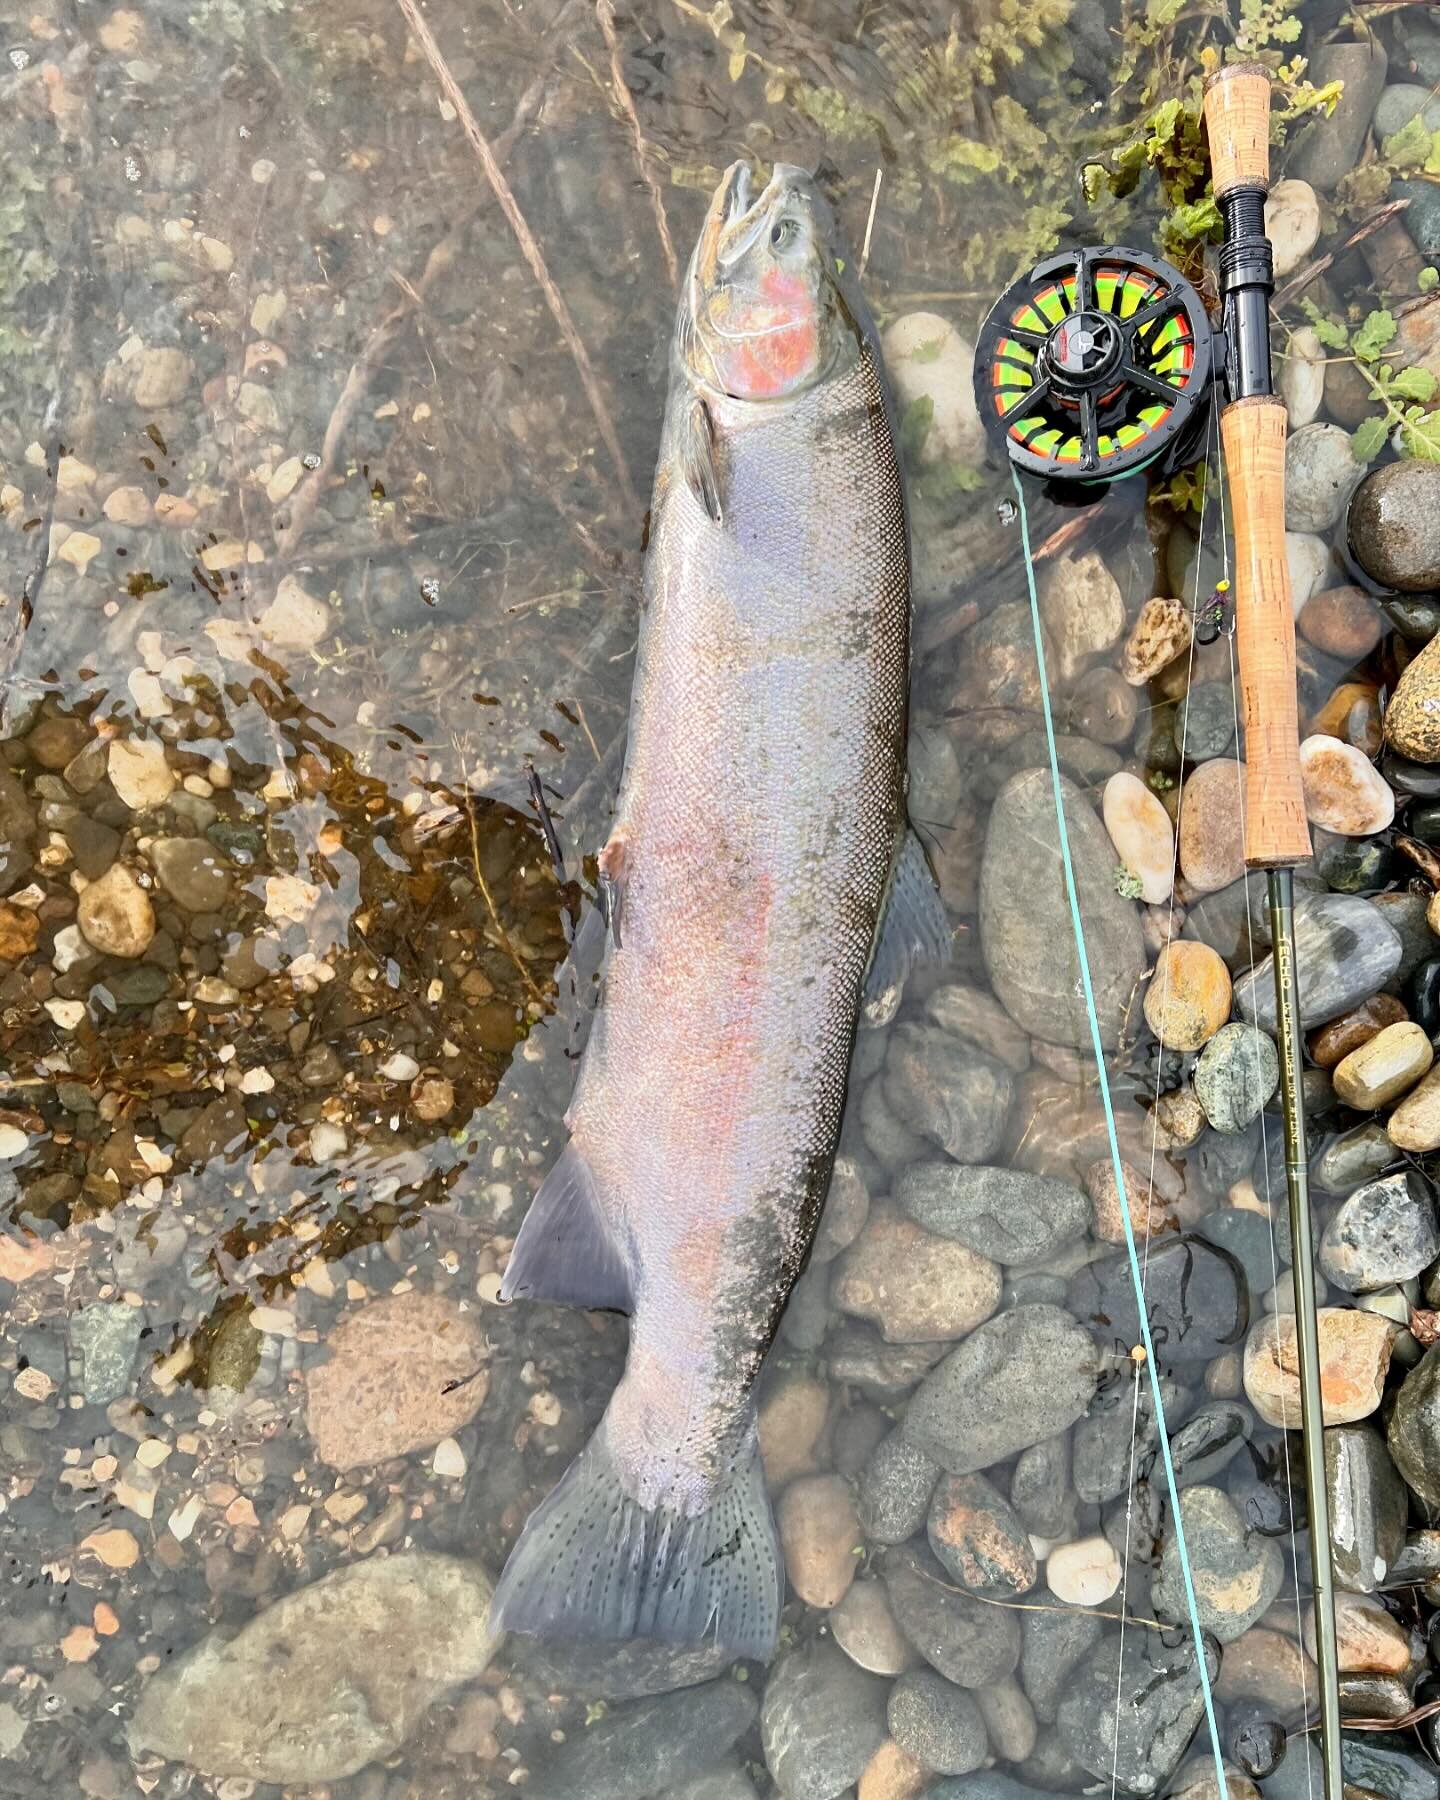 I braved the storm yesterday and was pleasantly surprised with some valley steelhead and a blueback on the swing🎣🐋. I used the @echoflyfishing OHS (one handed spey) #8 rod with the @opskagit commando groove setup. 🙌

#spey #catchandrelease #winter